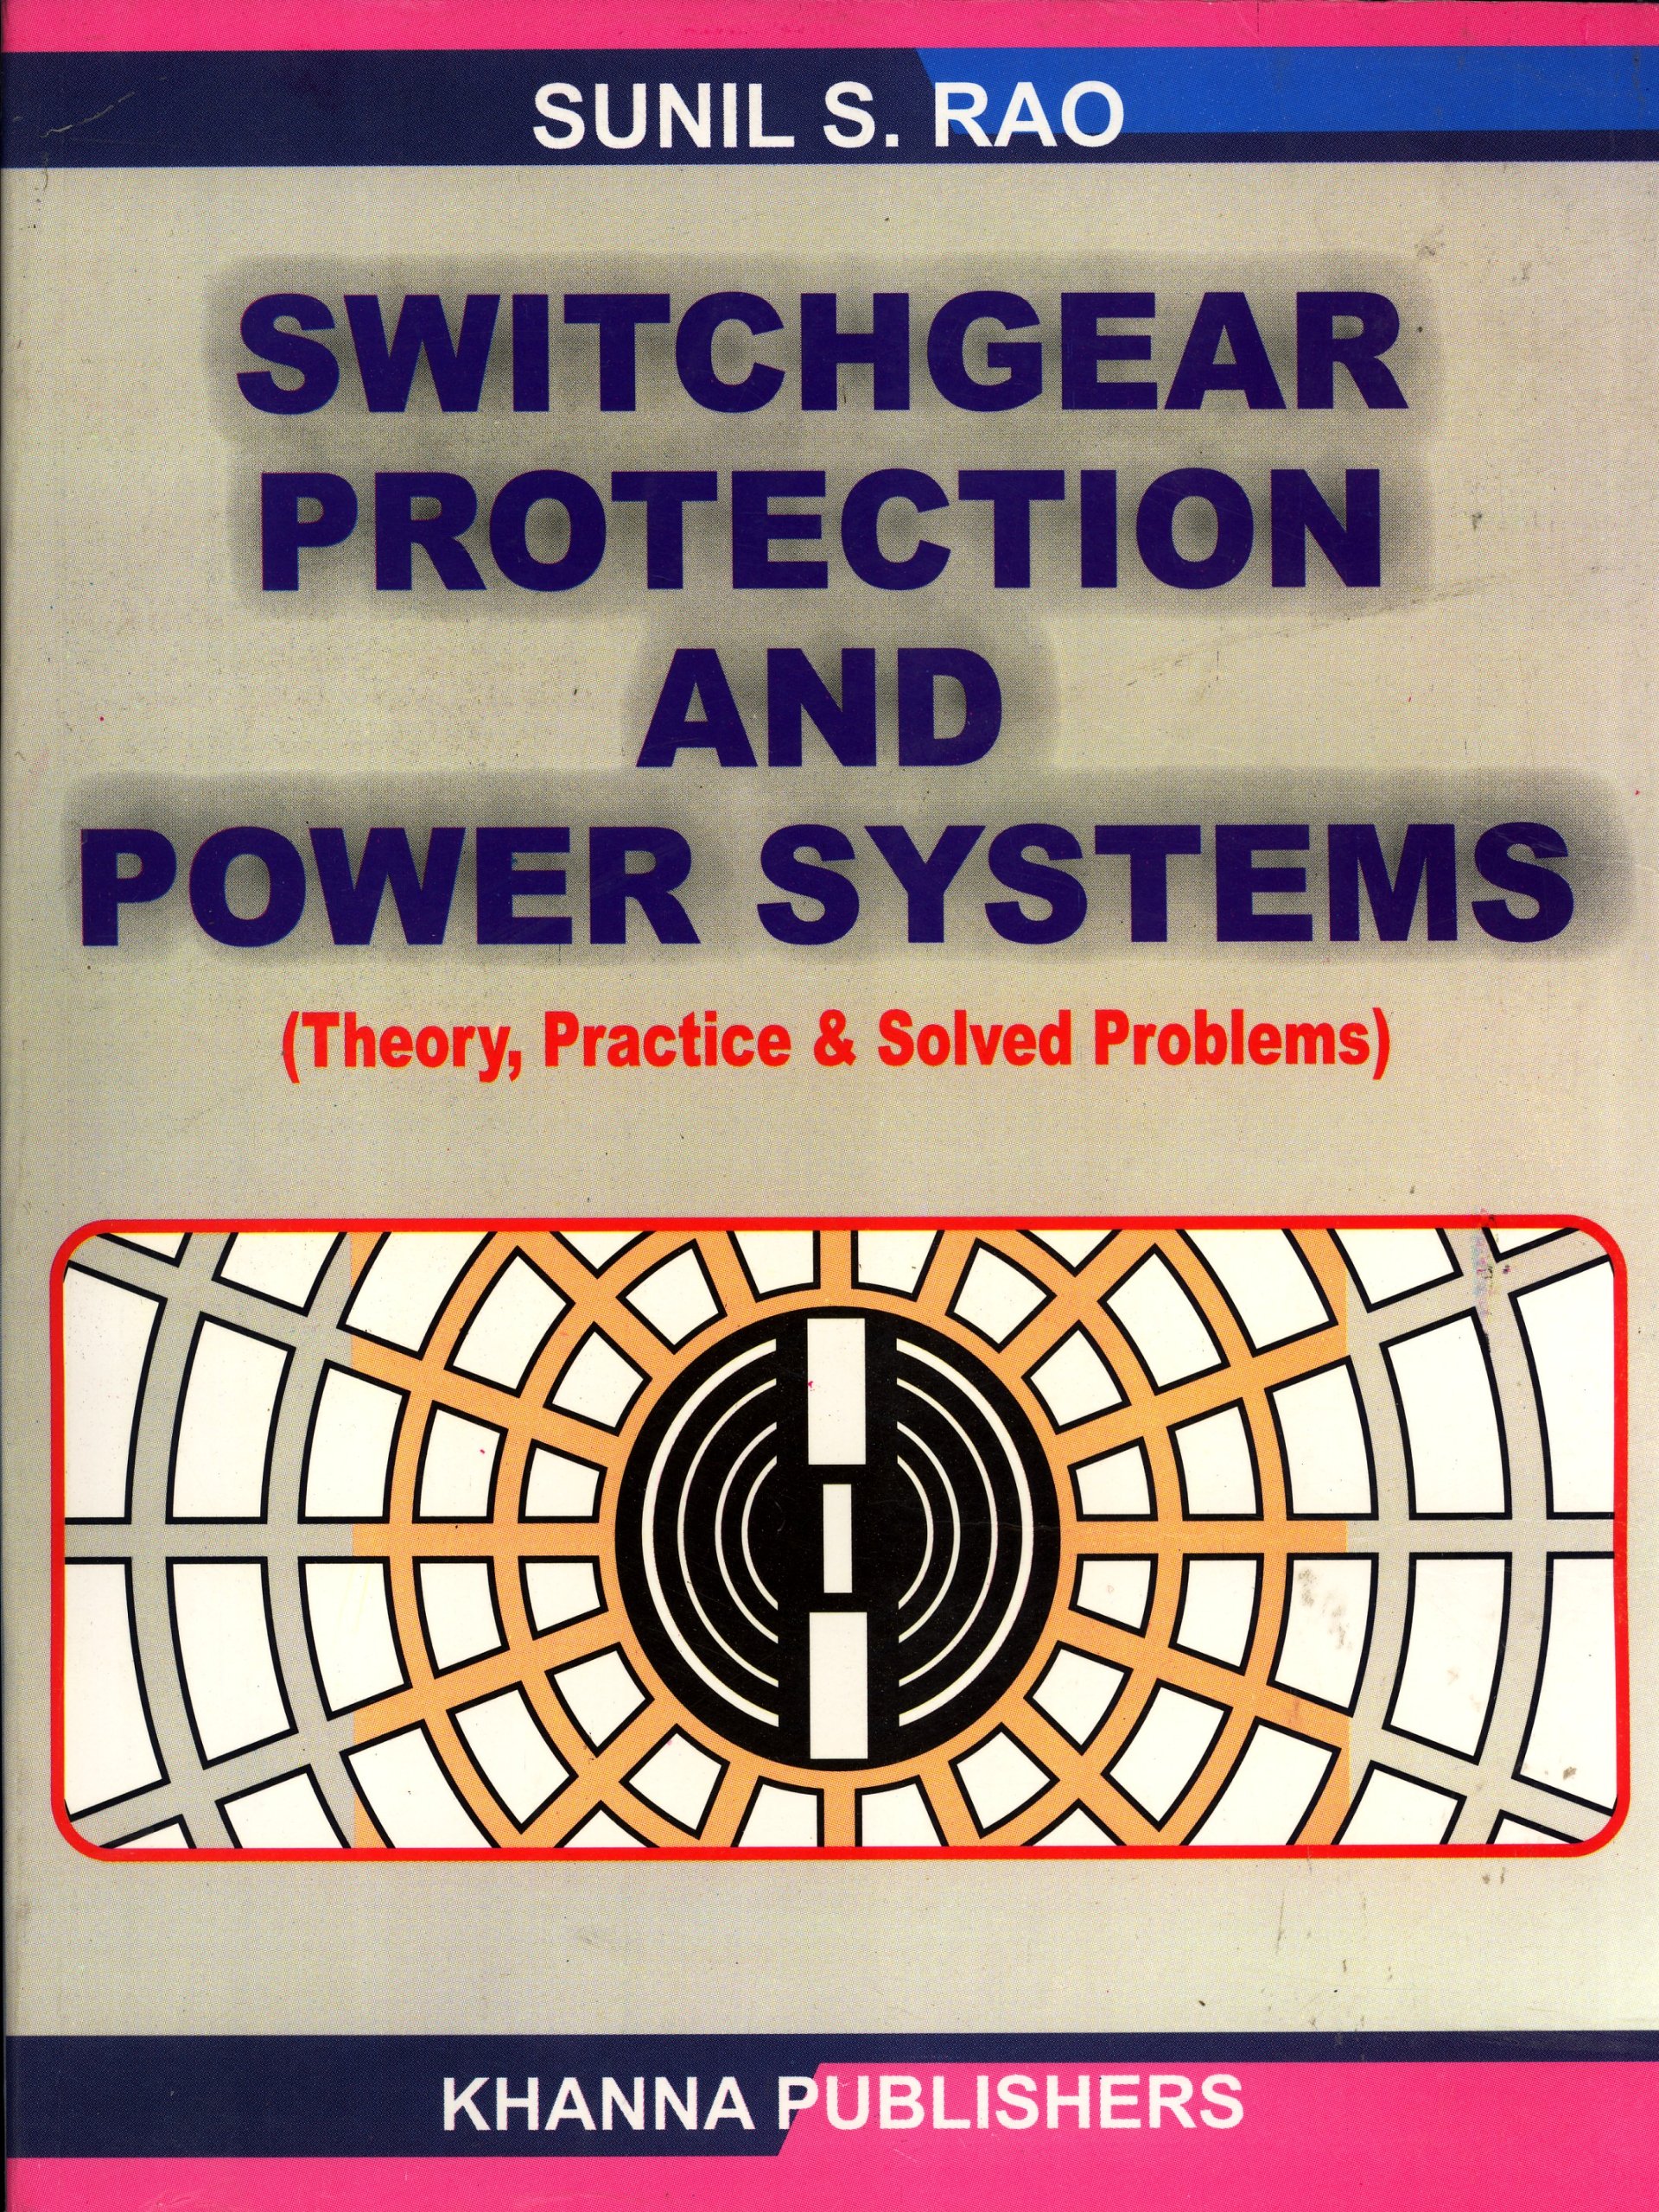 SWITCH GEAR & PROTECTION SUNIL S RAO (RKGOTHWAL)